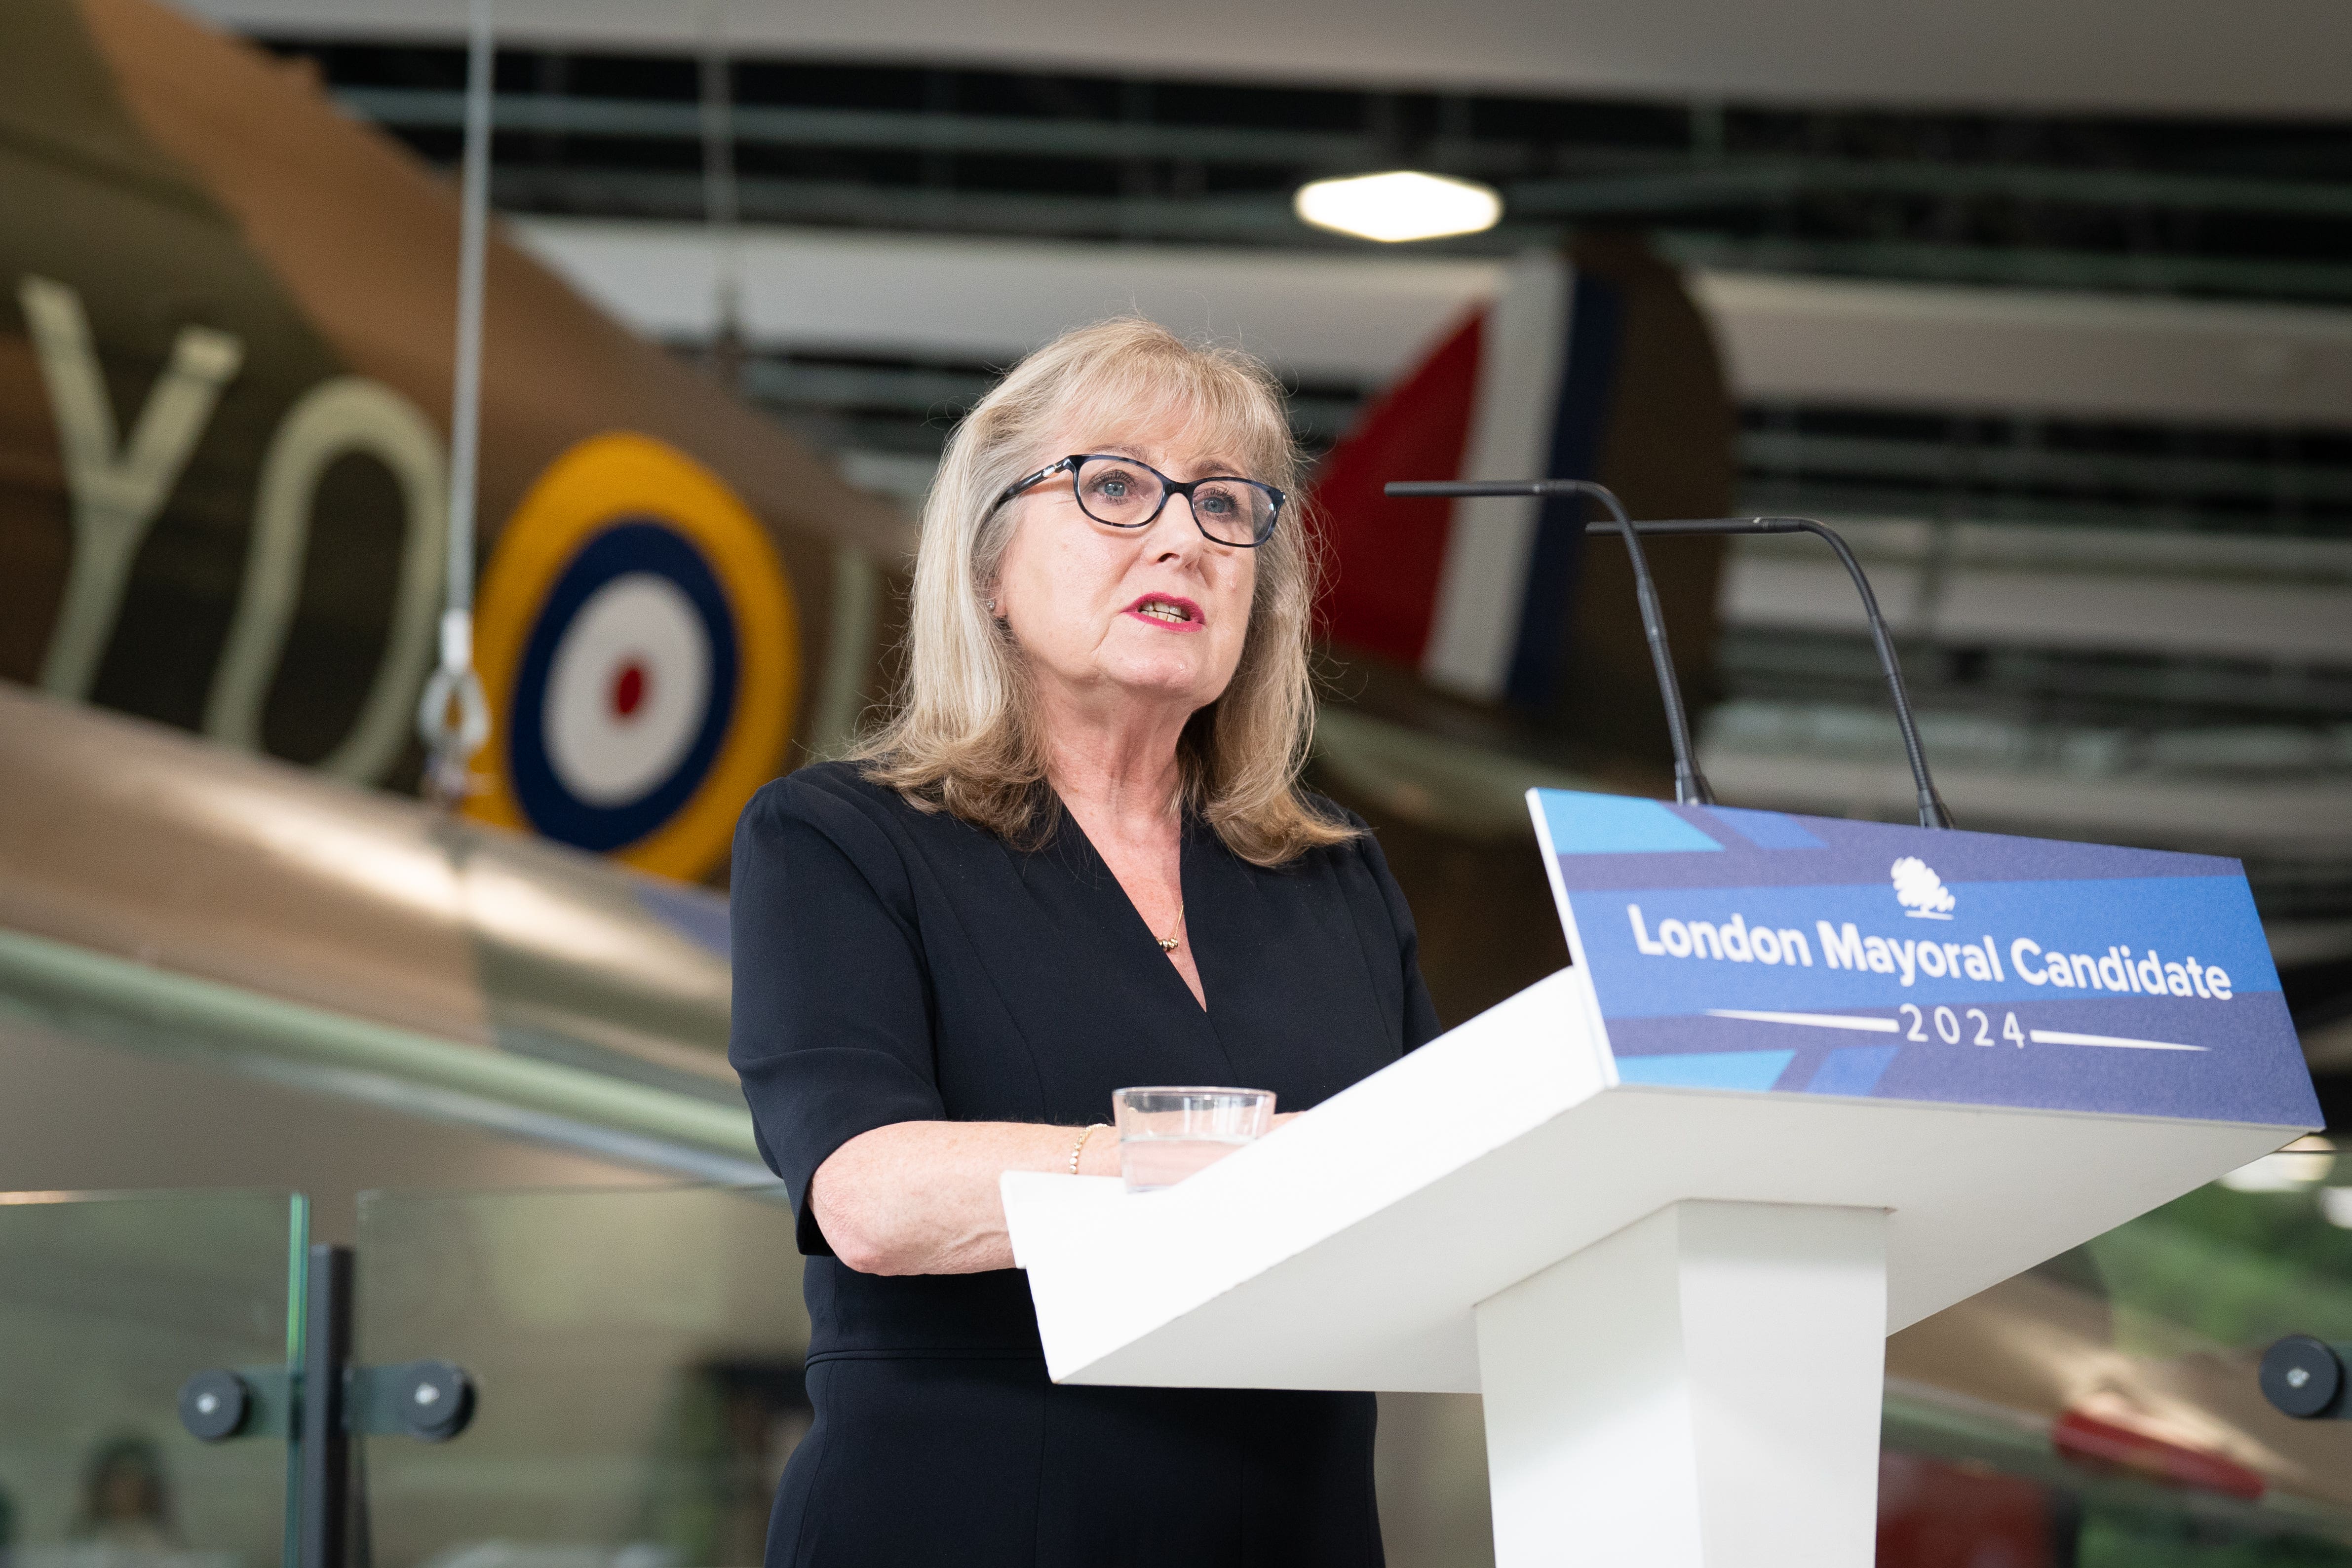 Councillor Susan Hall speaks at the Battle of Britain Bunker in Uxbridge, west London, after being named as the Conservative Party candidate for the Mayor of London election in 2024 (Stefan Rousseau/PA)